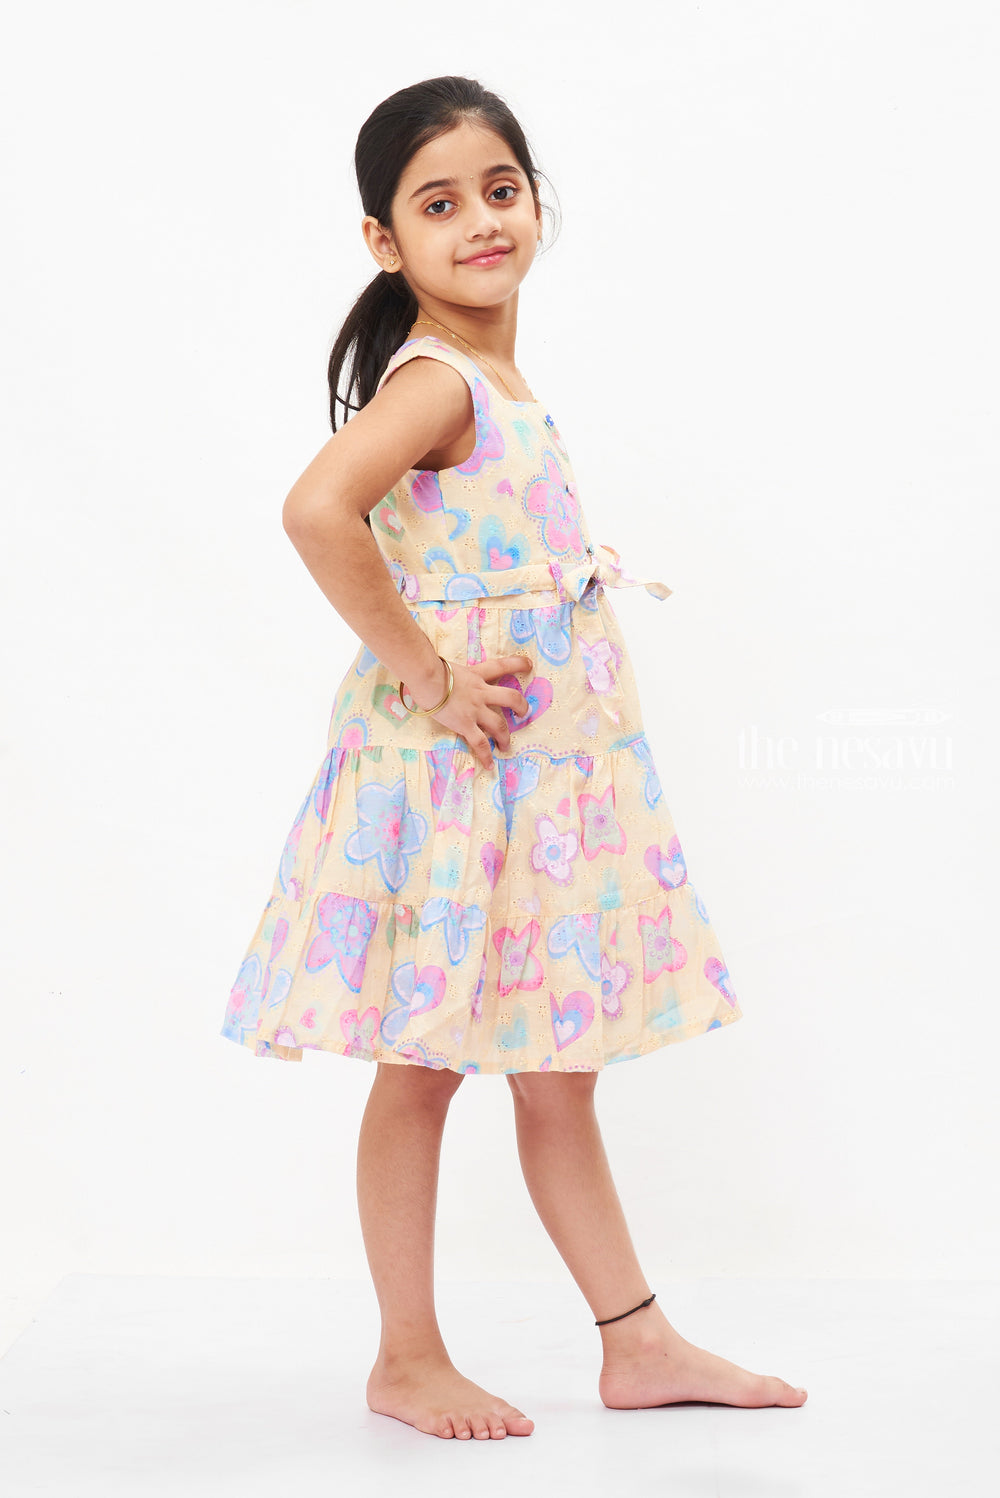 The Nesavu Girls Cotton Frock Cheerful Yellow Cotton Frock with Butterfly Patterns for Girls - Perfect for Daily Wear Nesavu Yellow Butterfly Cotton Frock for Girls | Designer Knee-Length Dress Online | The Nesavu